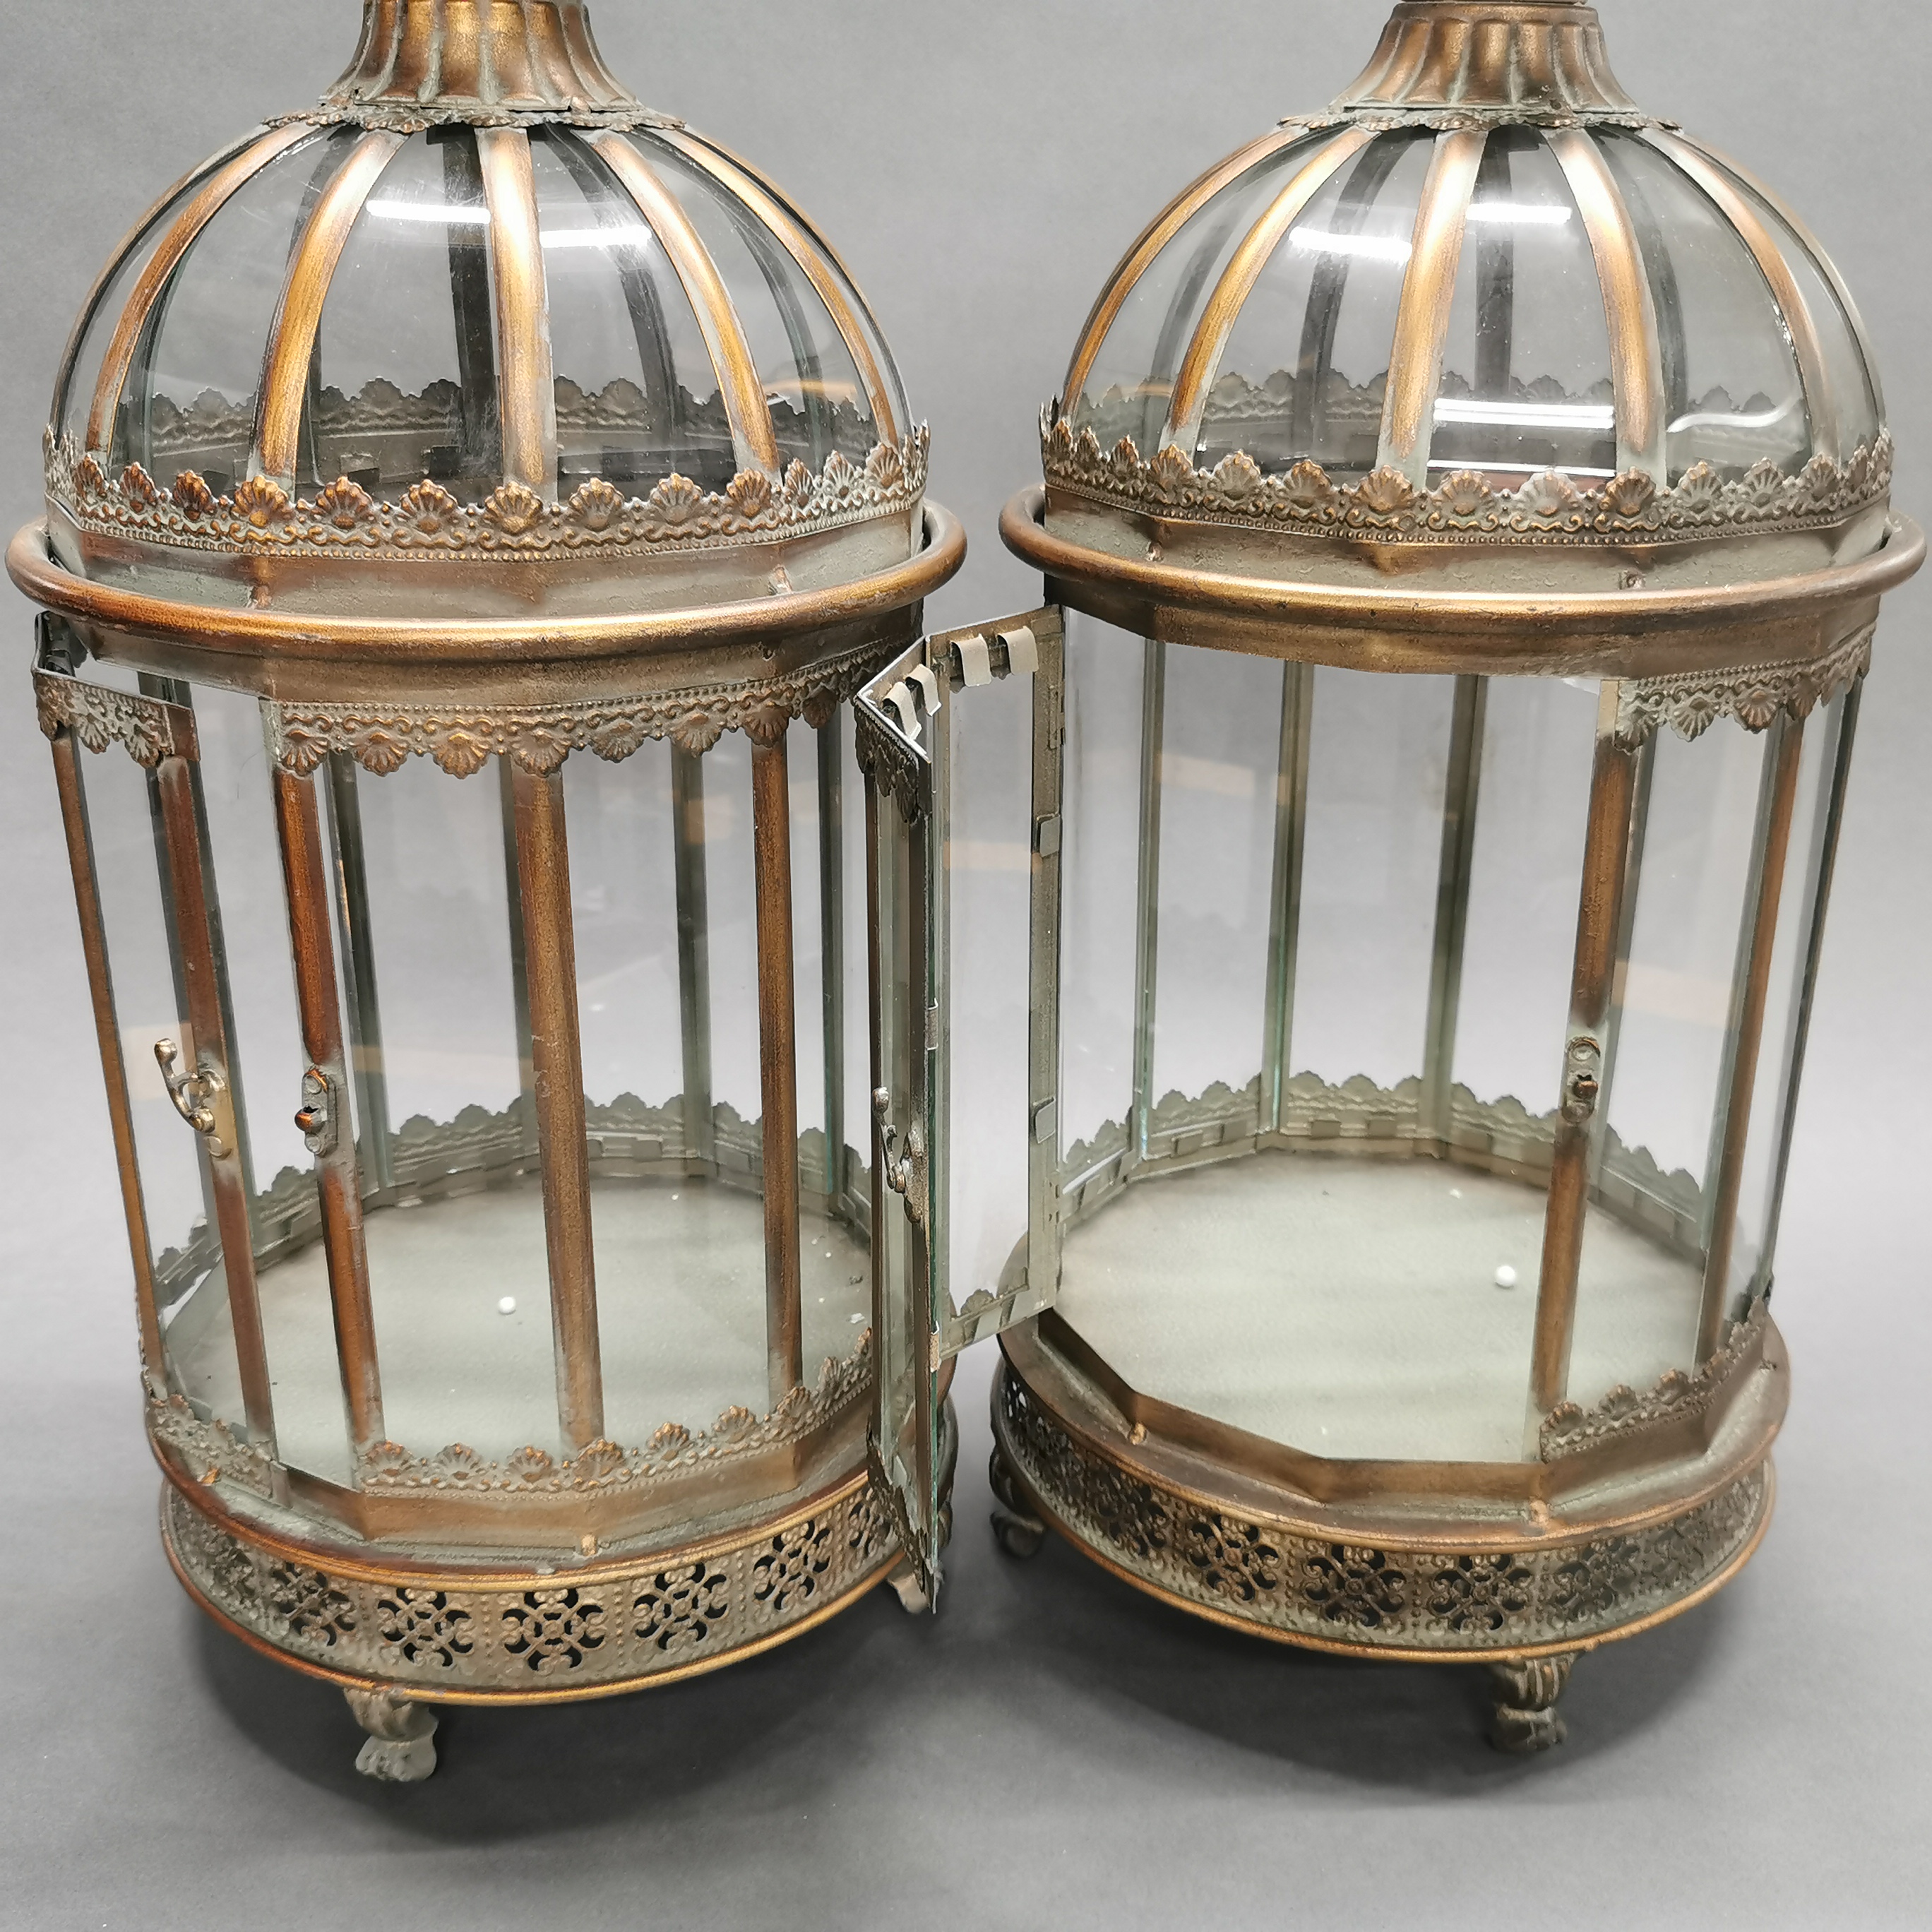 A pair of bronzed metal and glass garden lanterns, H. 62cm. - Image 3 of 3